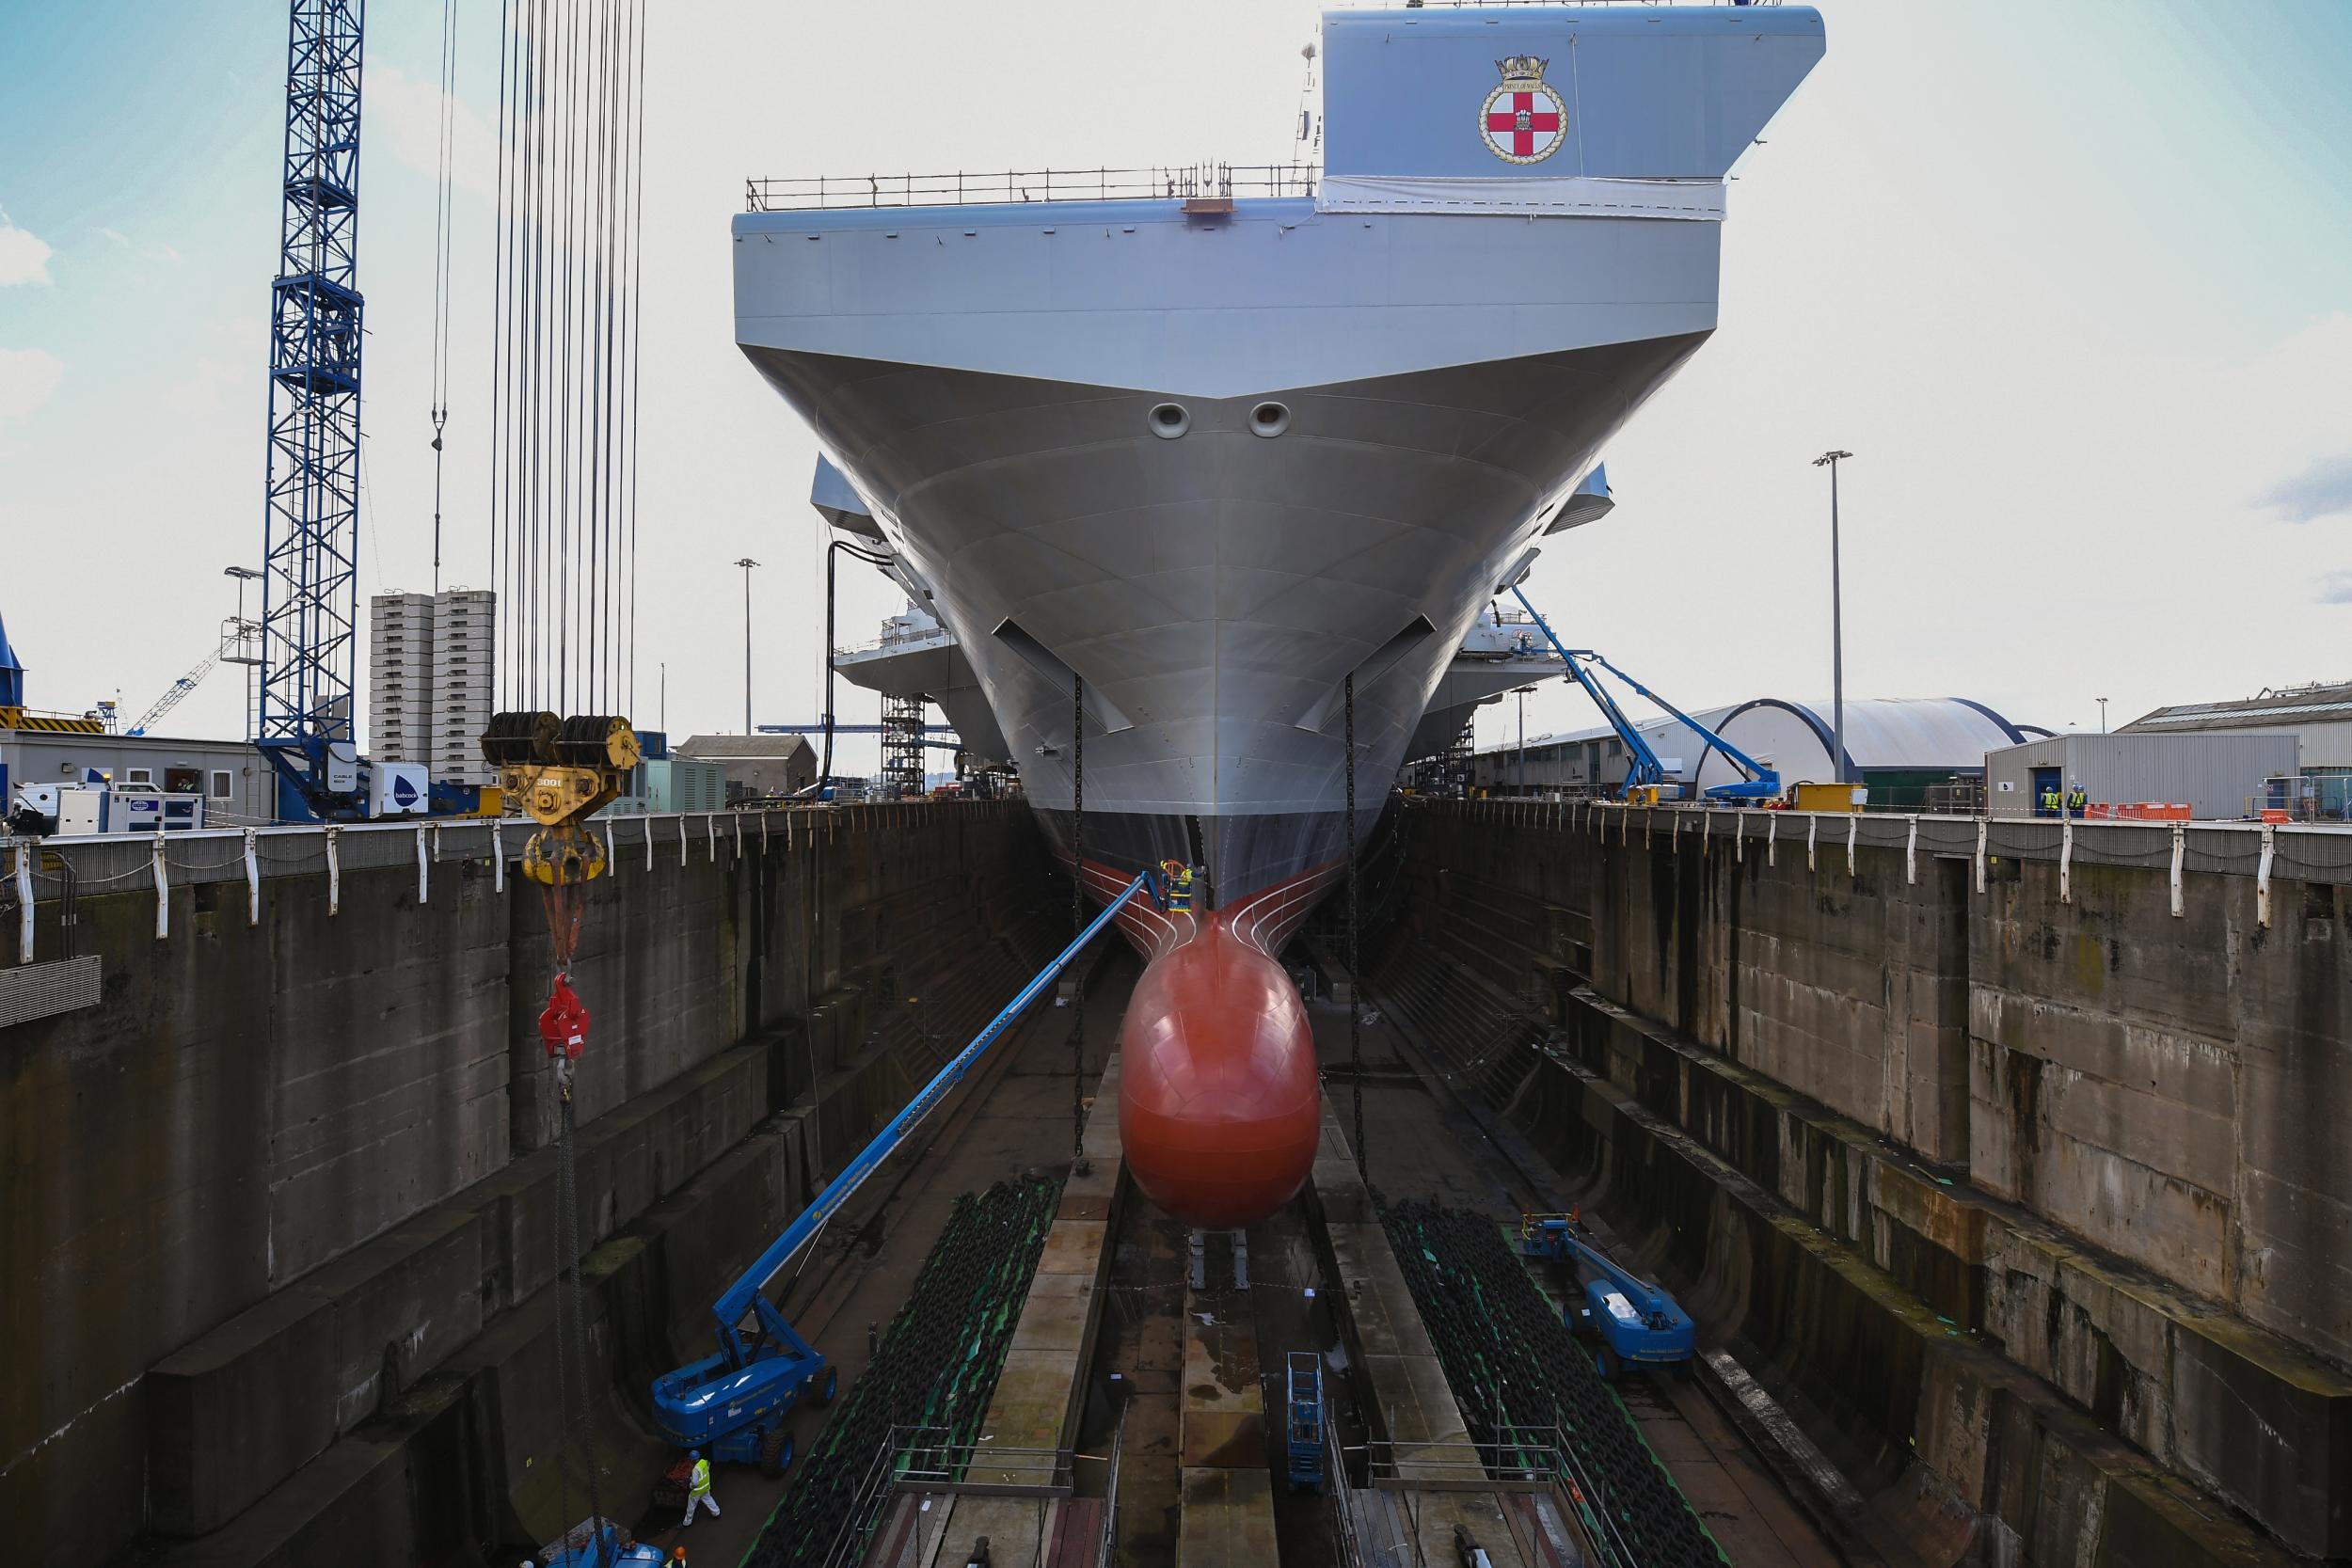 New Royal Navy ships will come with AI capabilities, the First Sea Lord has said. Pictured is the HMS Prince of Wales,slated for launch in 2020